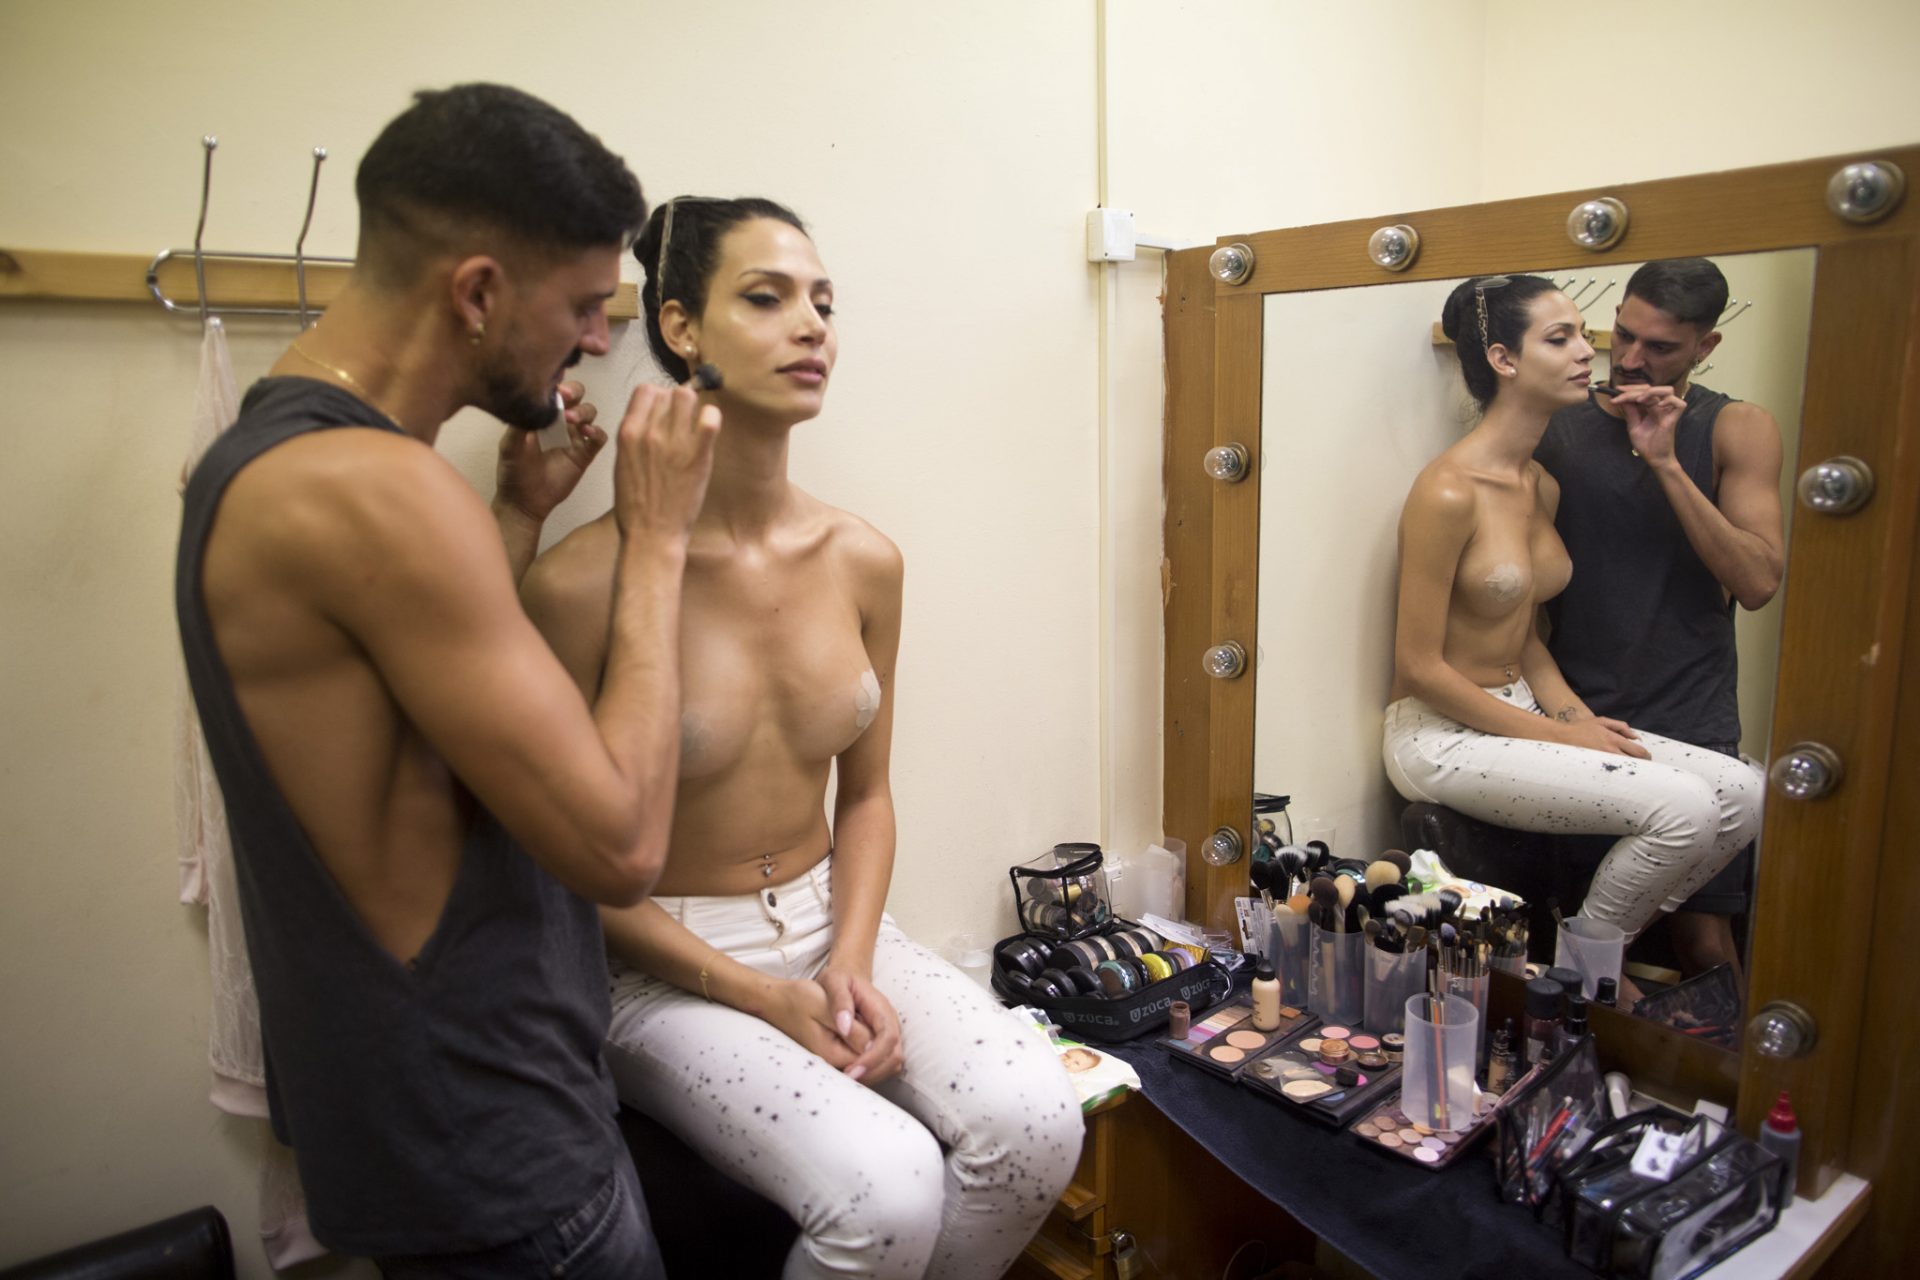 Israel Hold Its First Transgender Beauty Contest